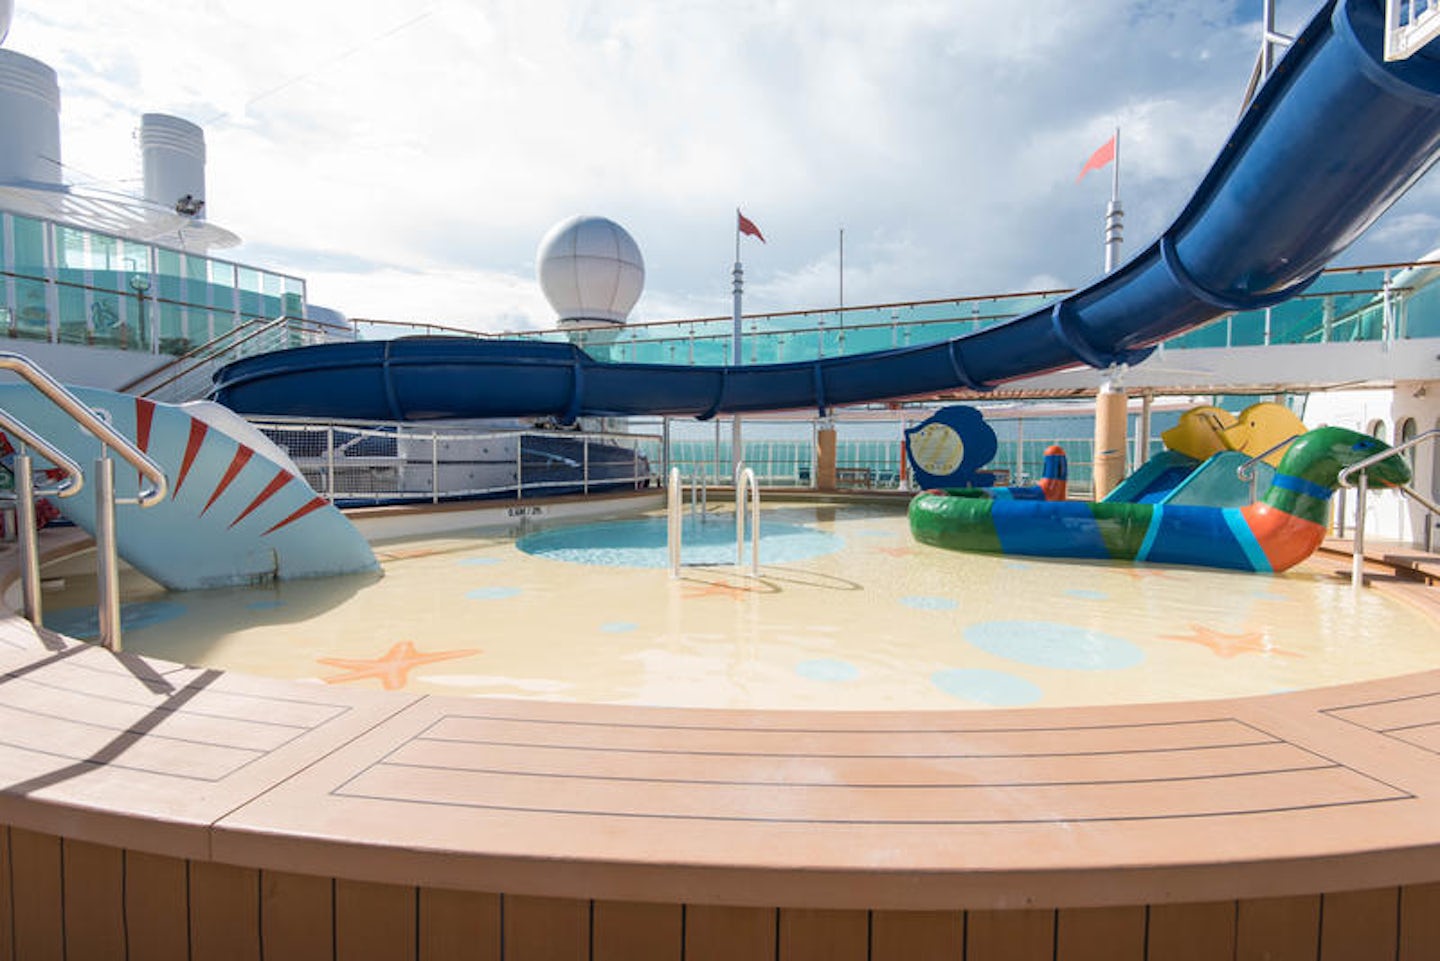 The Water Slide on Brilliance of the Seas